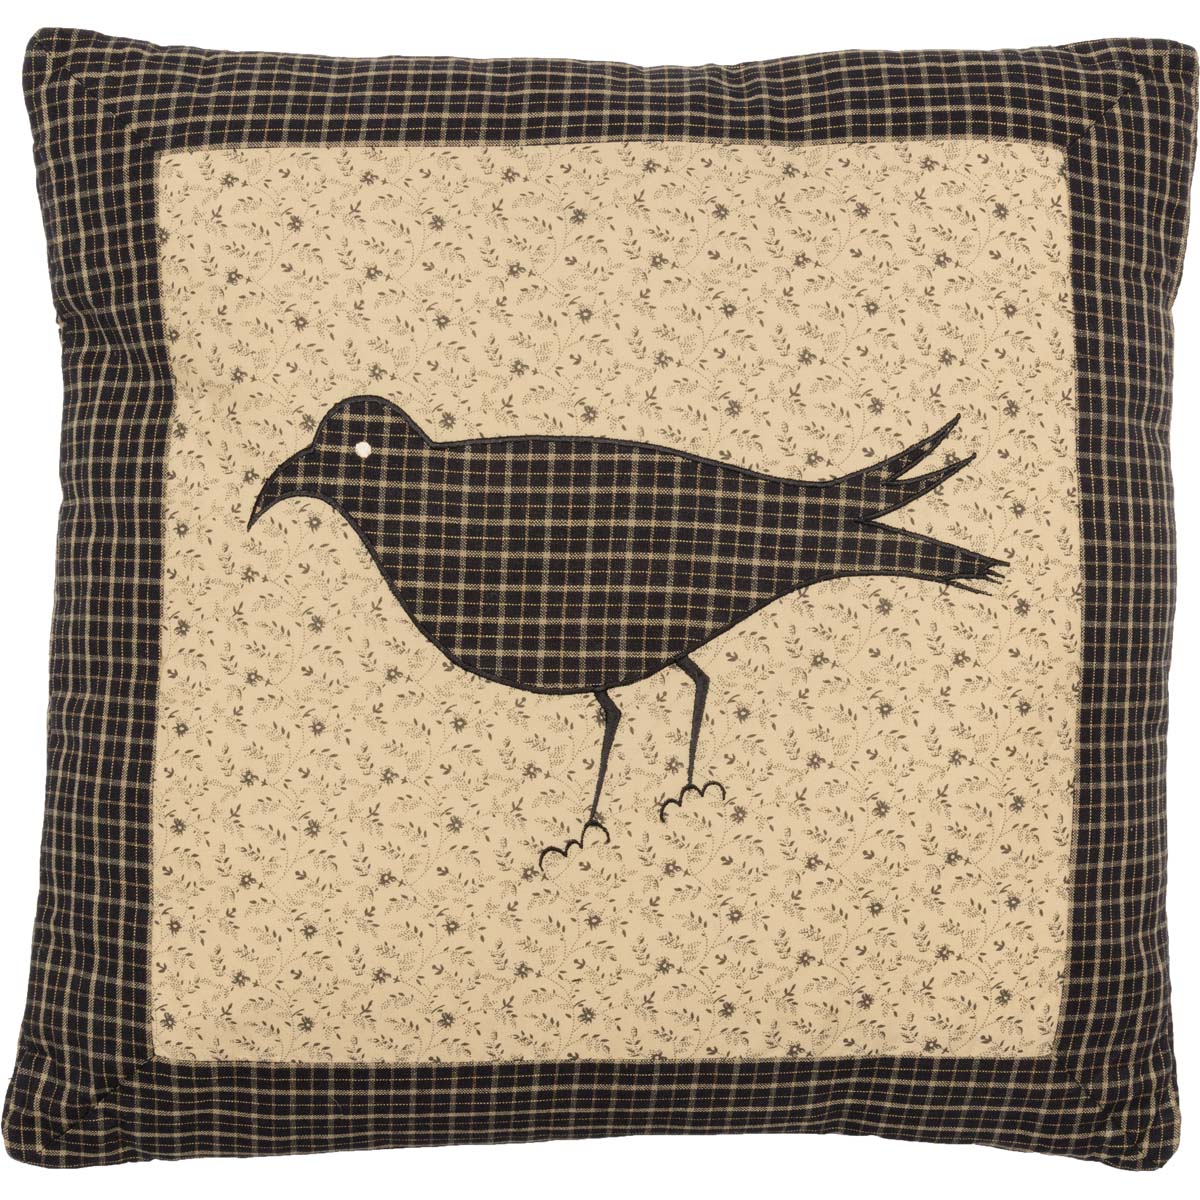 32924-Kettle-Grove-Pillow-Crow-16x16-image-4